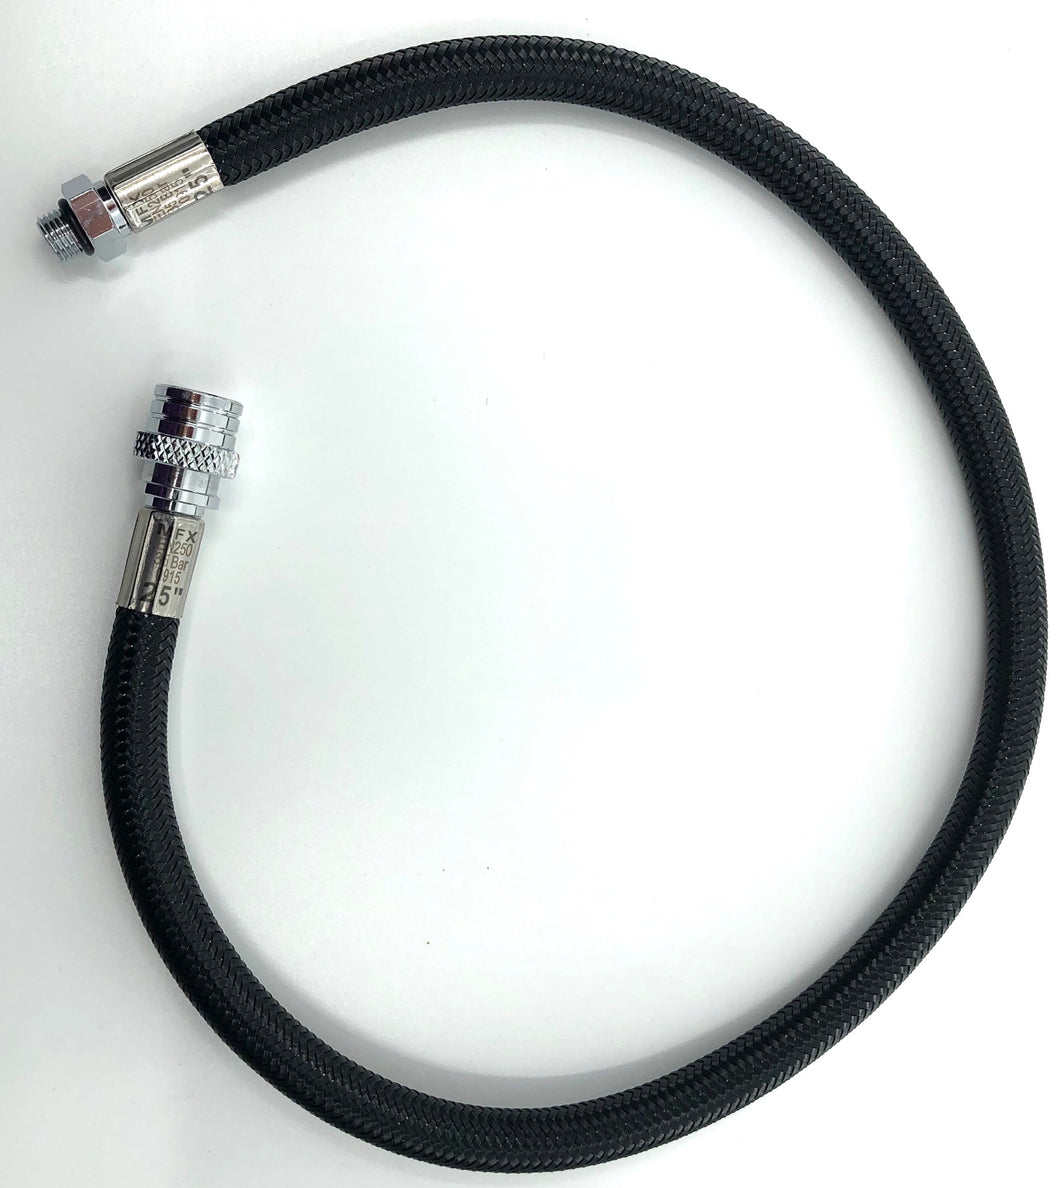 Braided BCD Hoses 22 and 24 inch